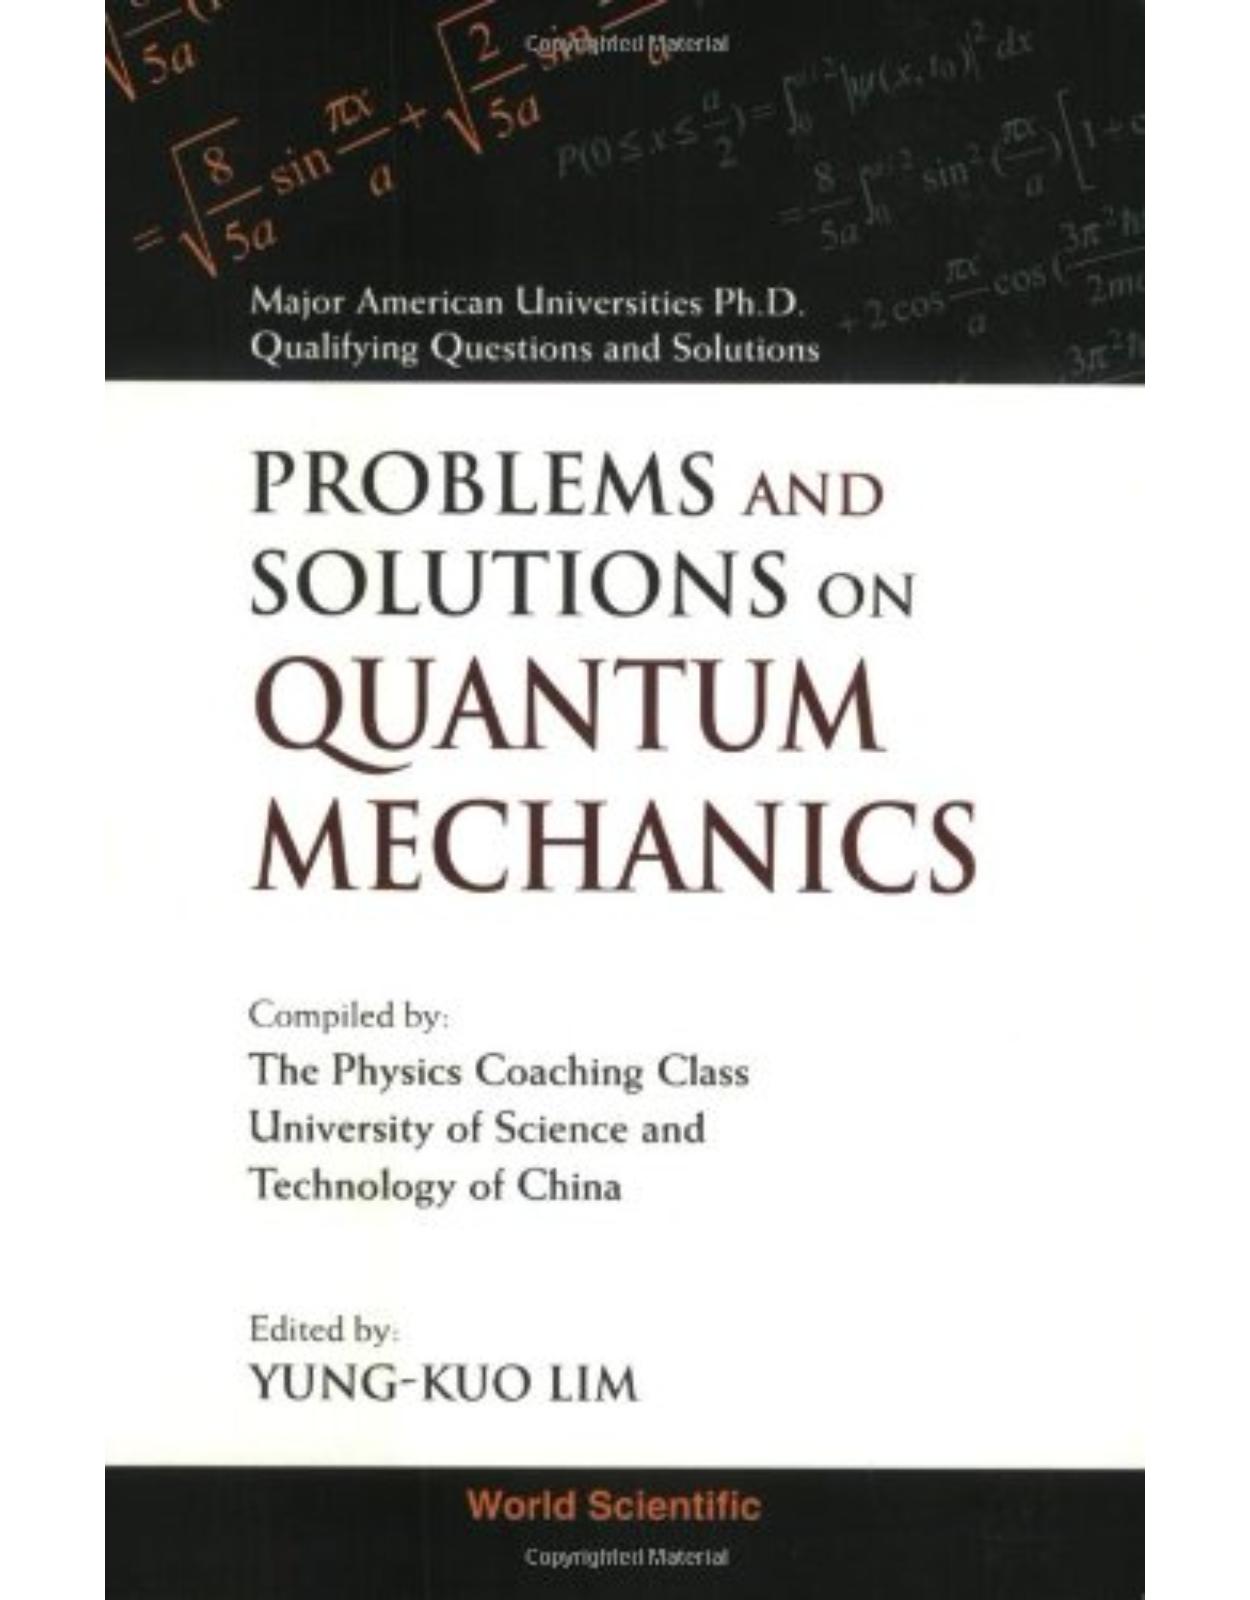 Problems and Solutions on Quantum Mechanics (Major American Universities Ph. D. Qualifying Questions and)